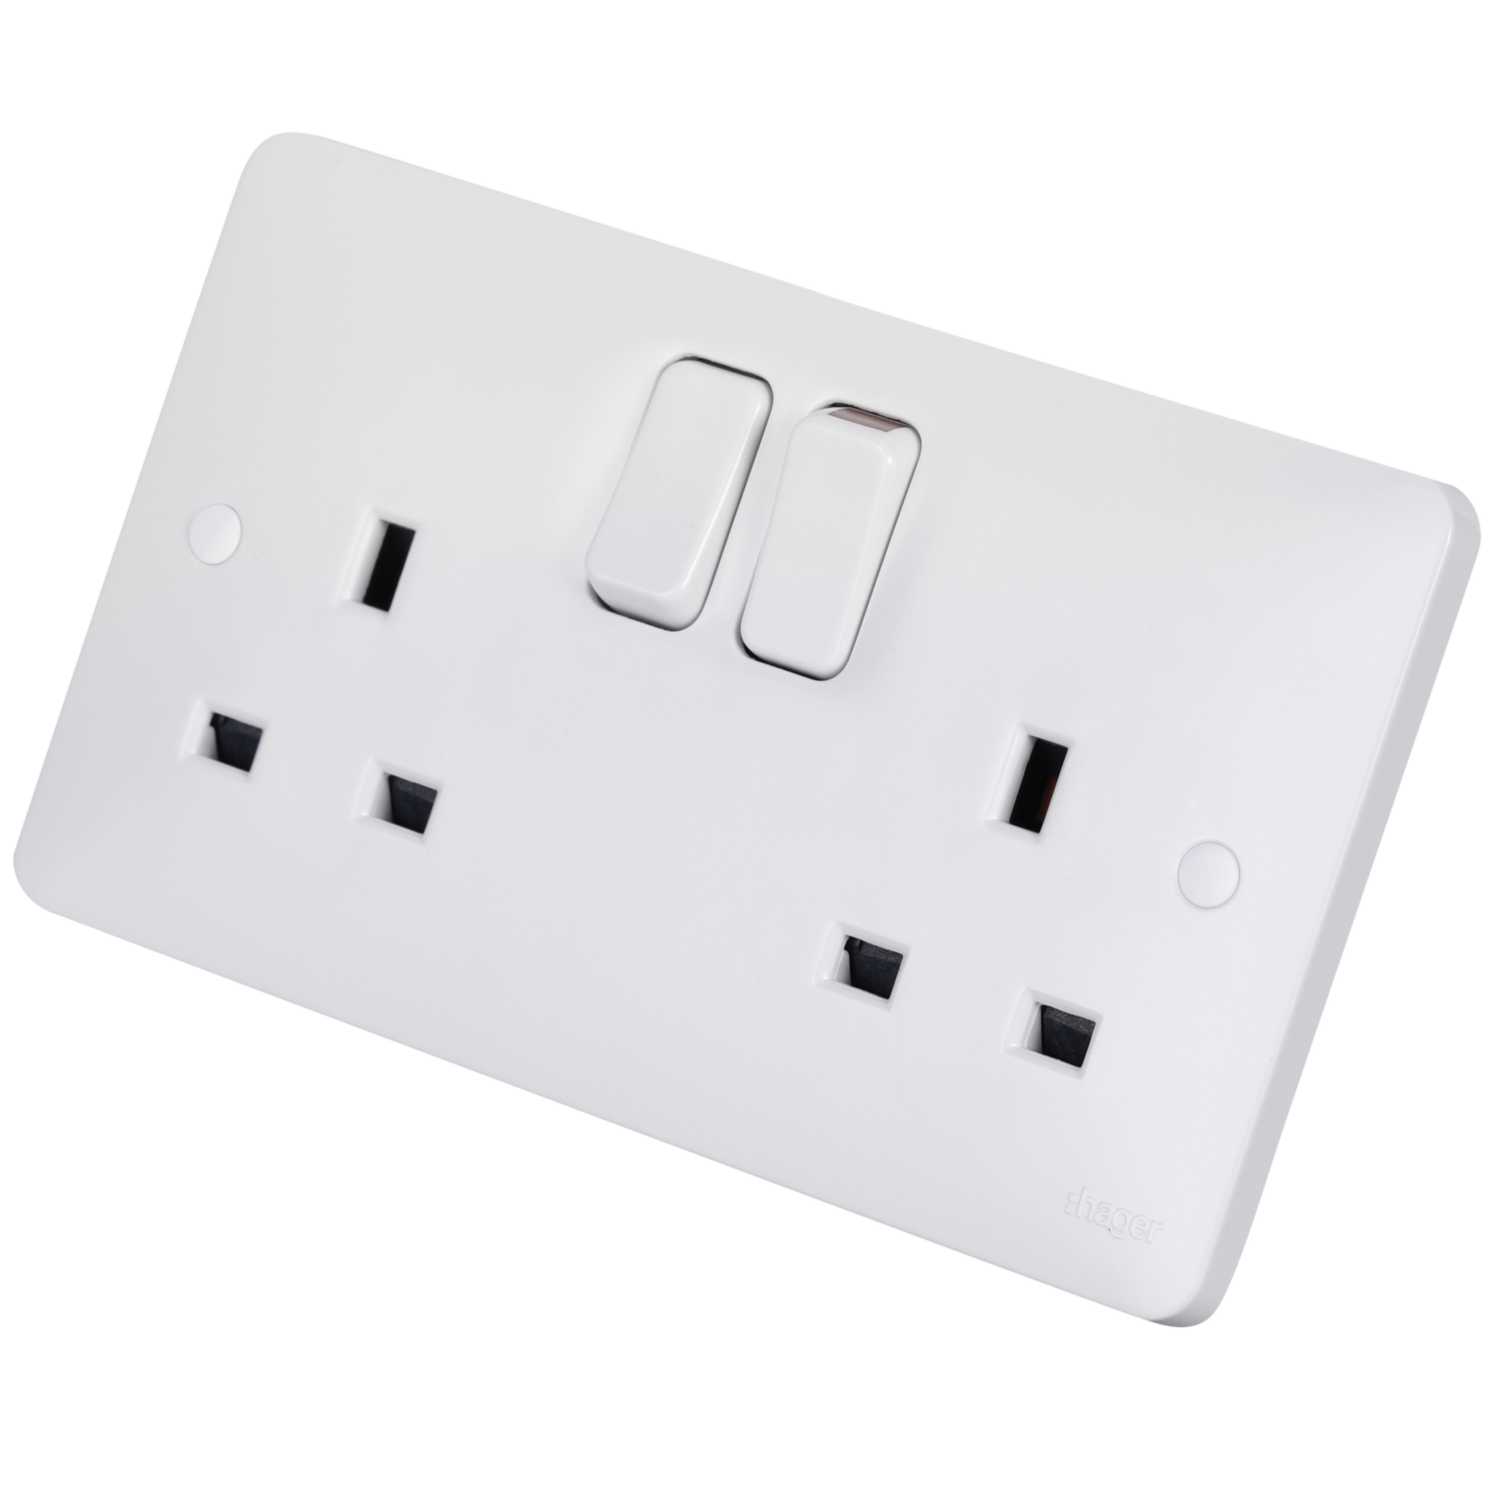 2 x Schneider 13A Single Gang Switched Wall Plug Socket White Electric GENUINE 